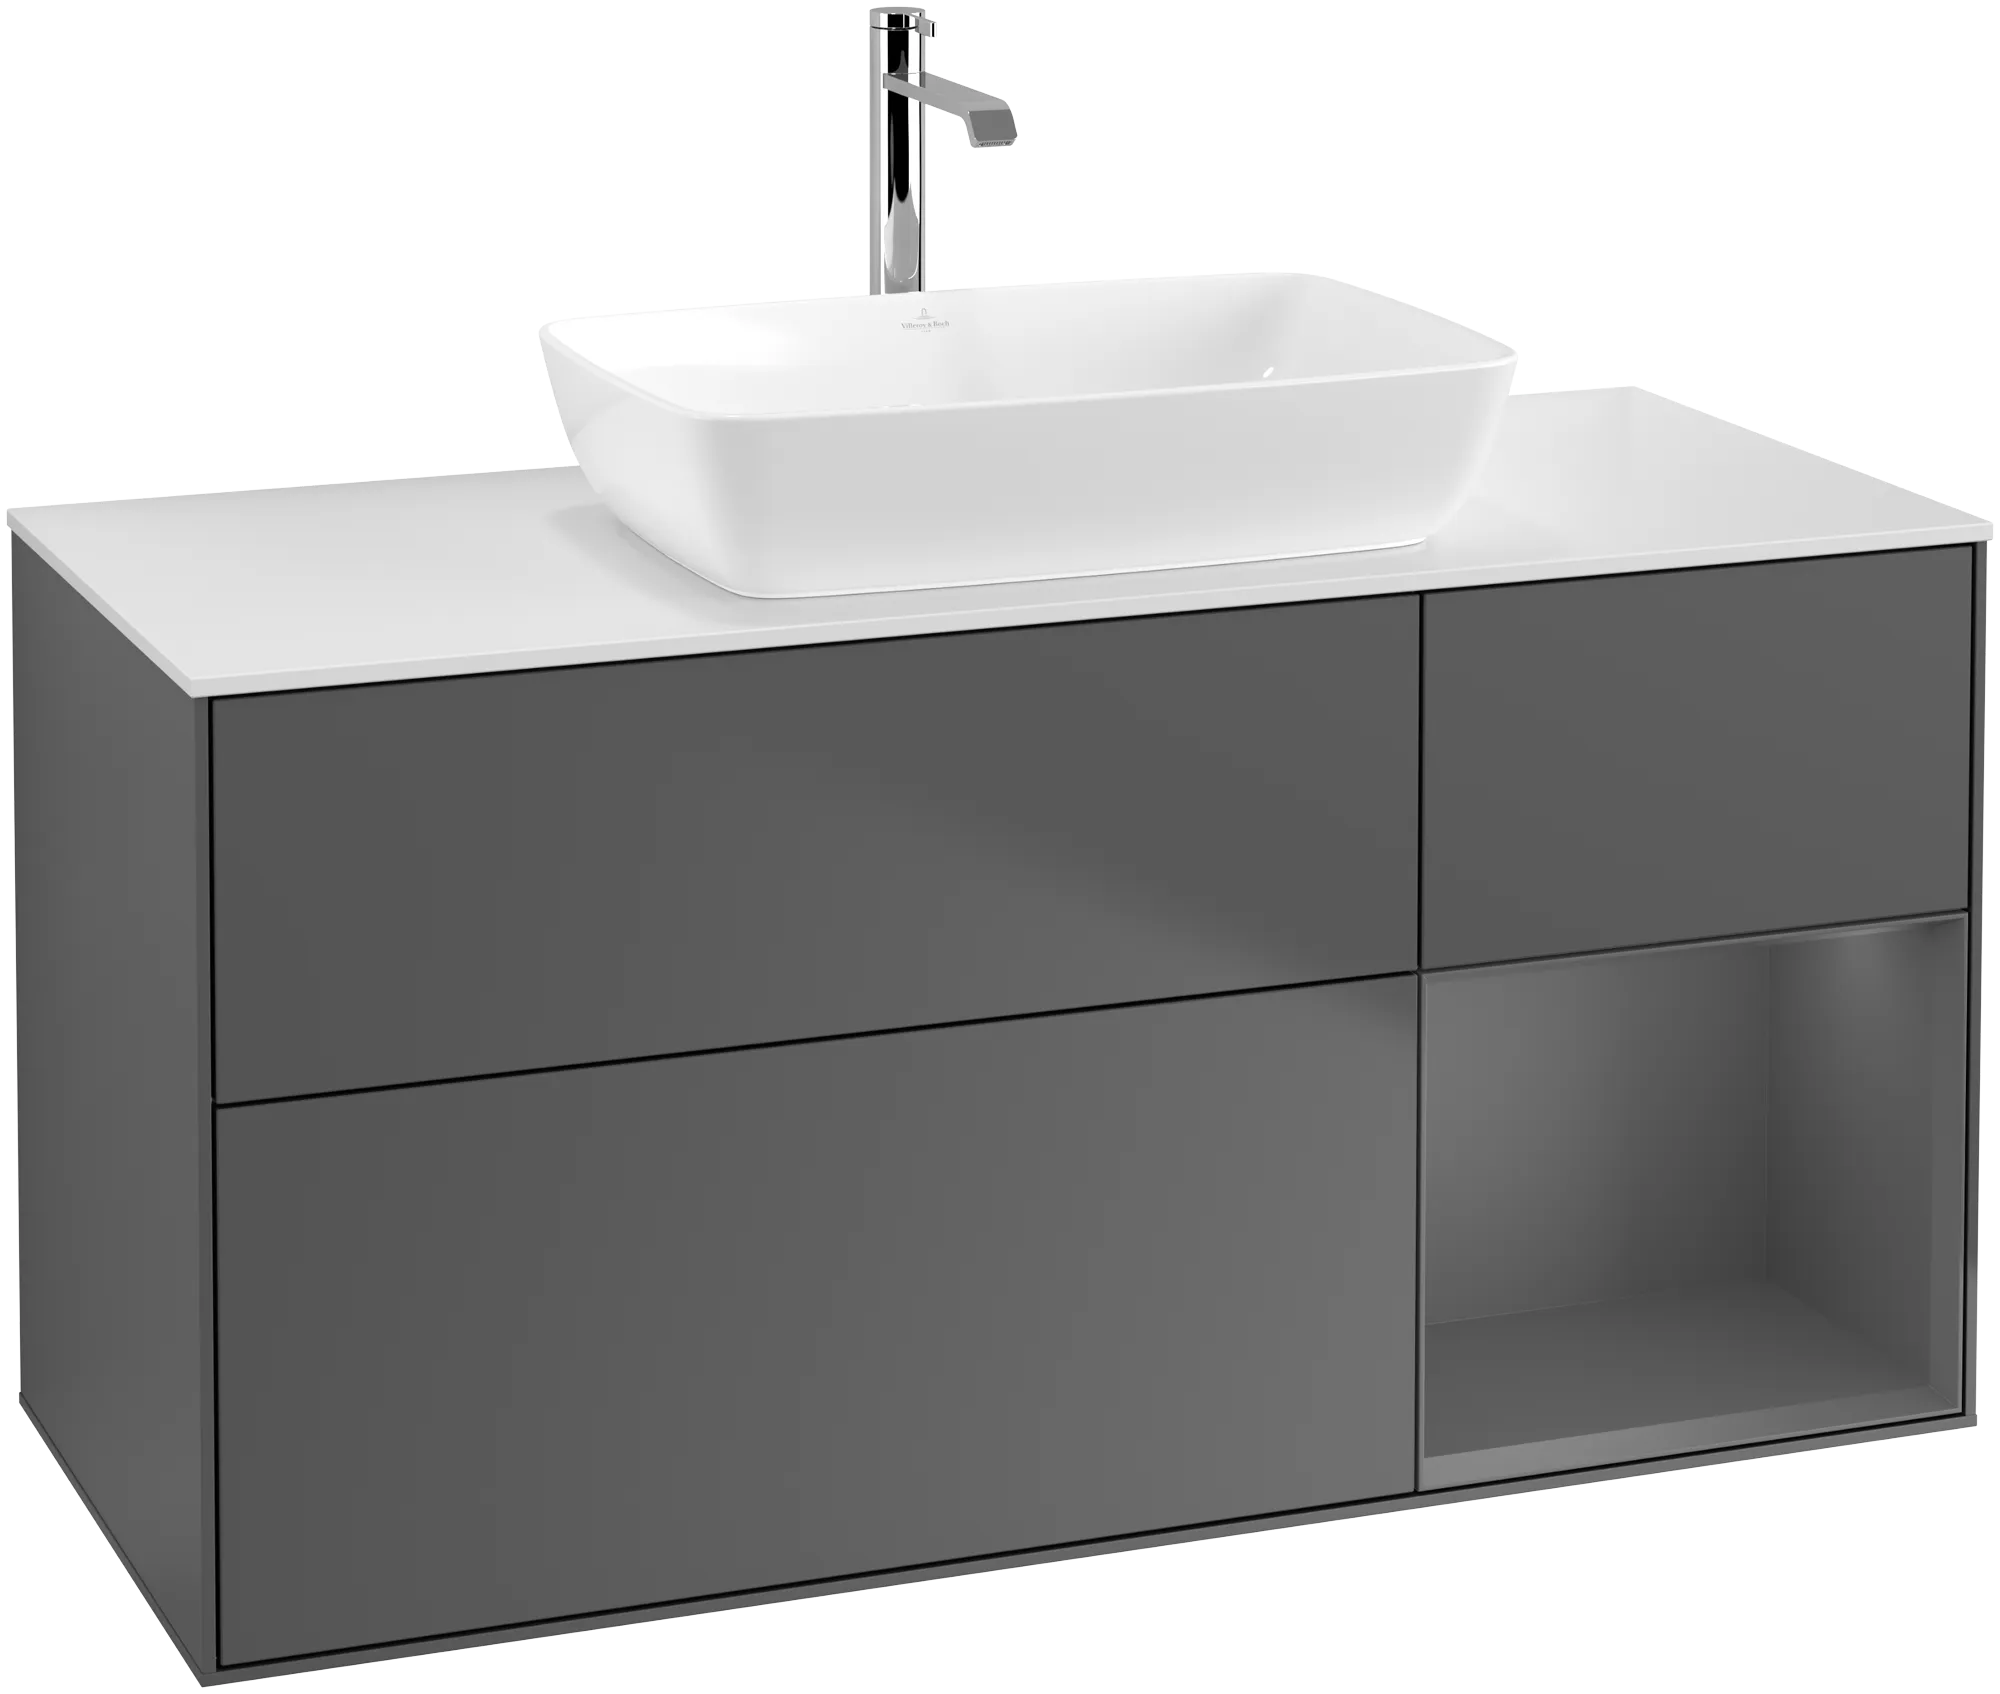 Picture of VILLEROY BOCH Finion Vanity unit, with lighting, 3 pull-out compartments, 1200 x 603 x 501 mm, Anthracite Matt Lacquer / Anthracite Matt Lacquer / Glass White Matt #G831GKGK